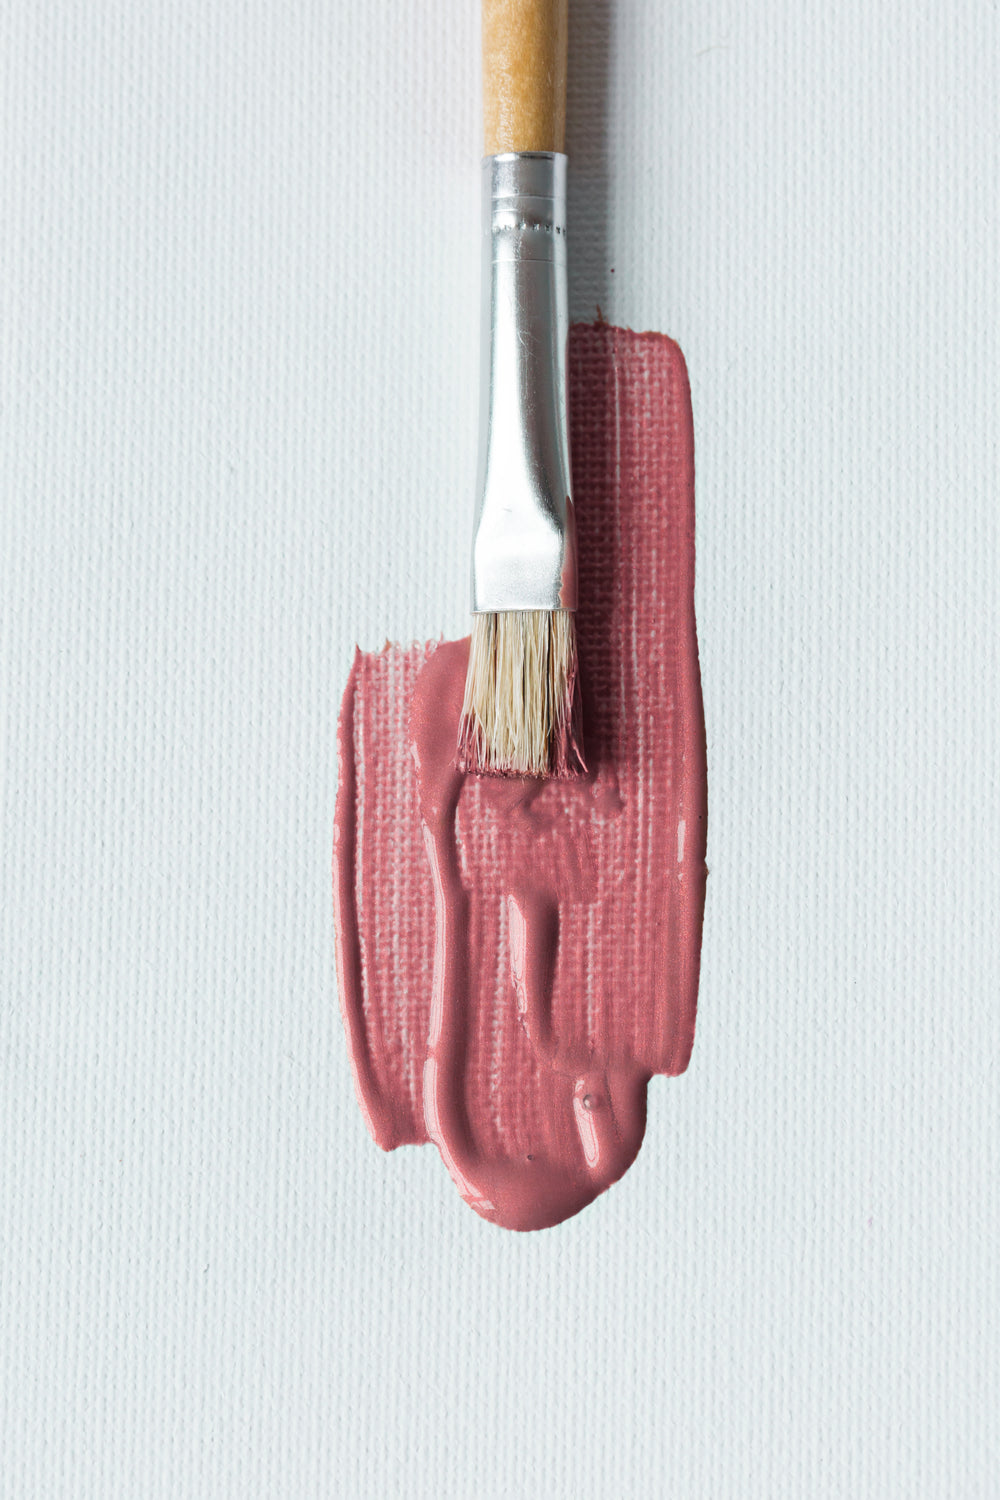 paintbrush with pink on canvas